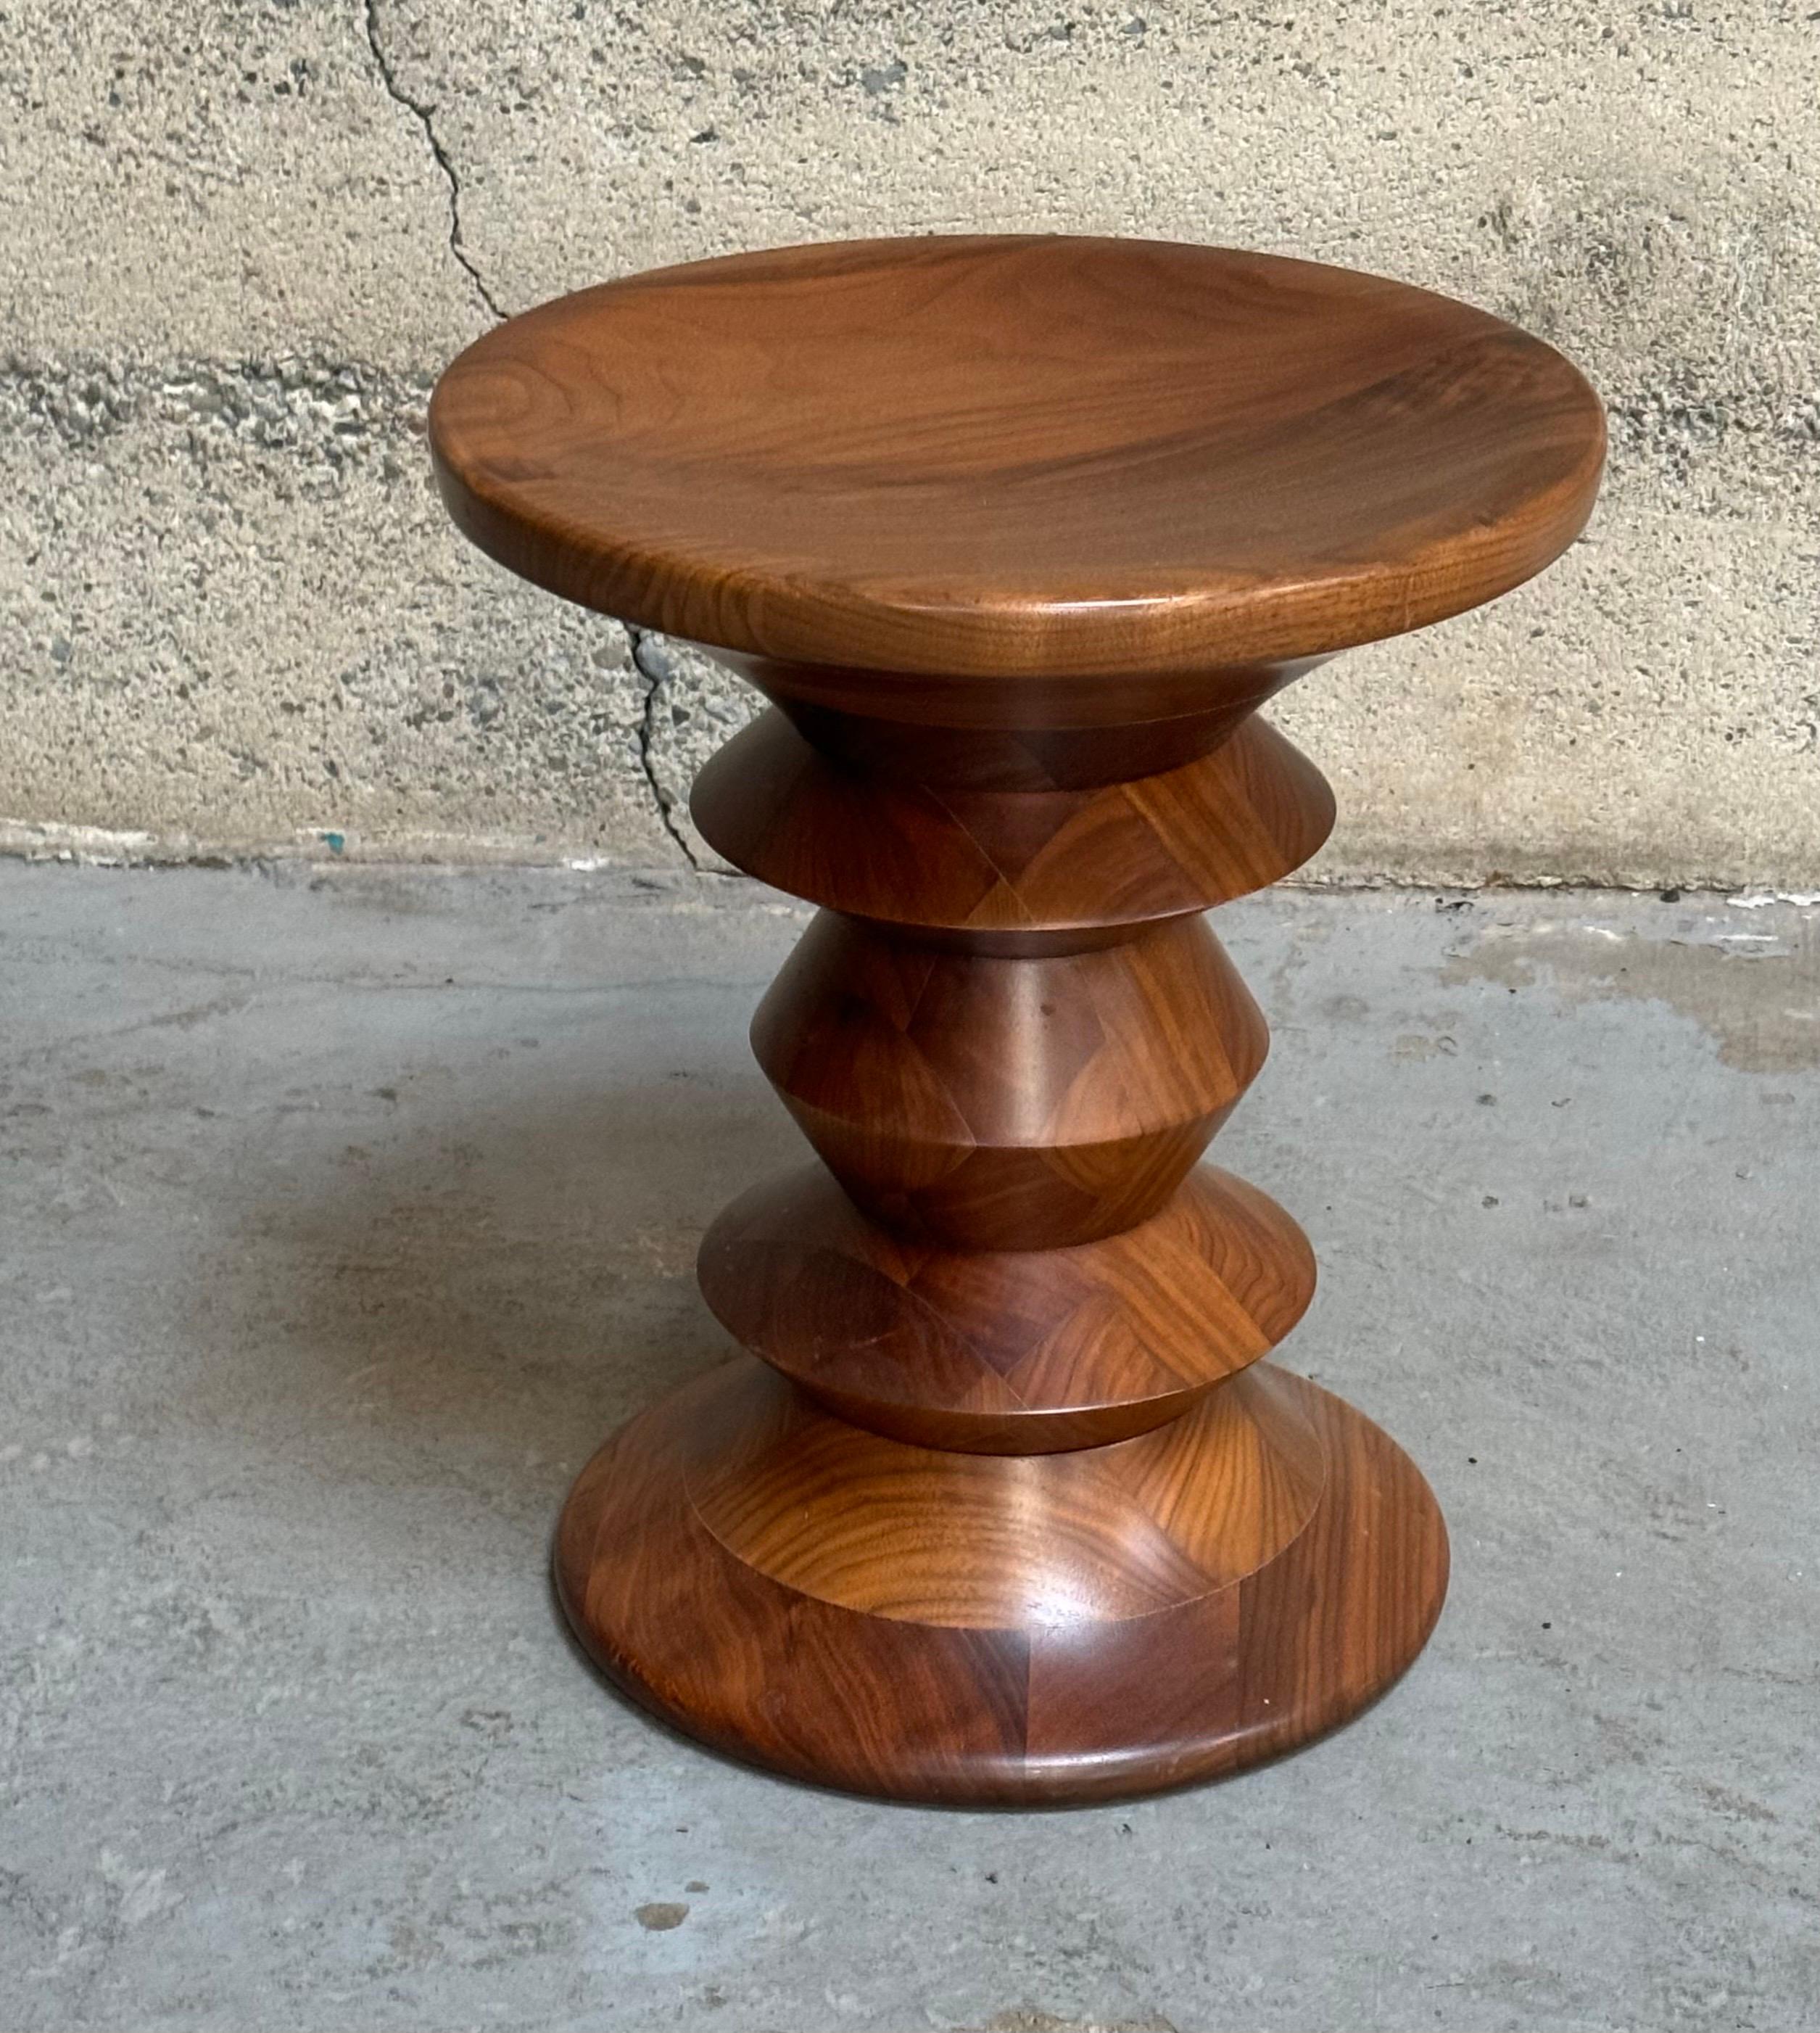 Times Life stool model C designed by Ray and Charles Eames for the Time Life Building during the 1950s, crafted from turned solid walnut. These are newer production pieces with a rich color and graining.